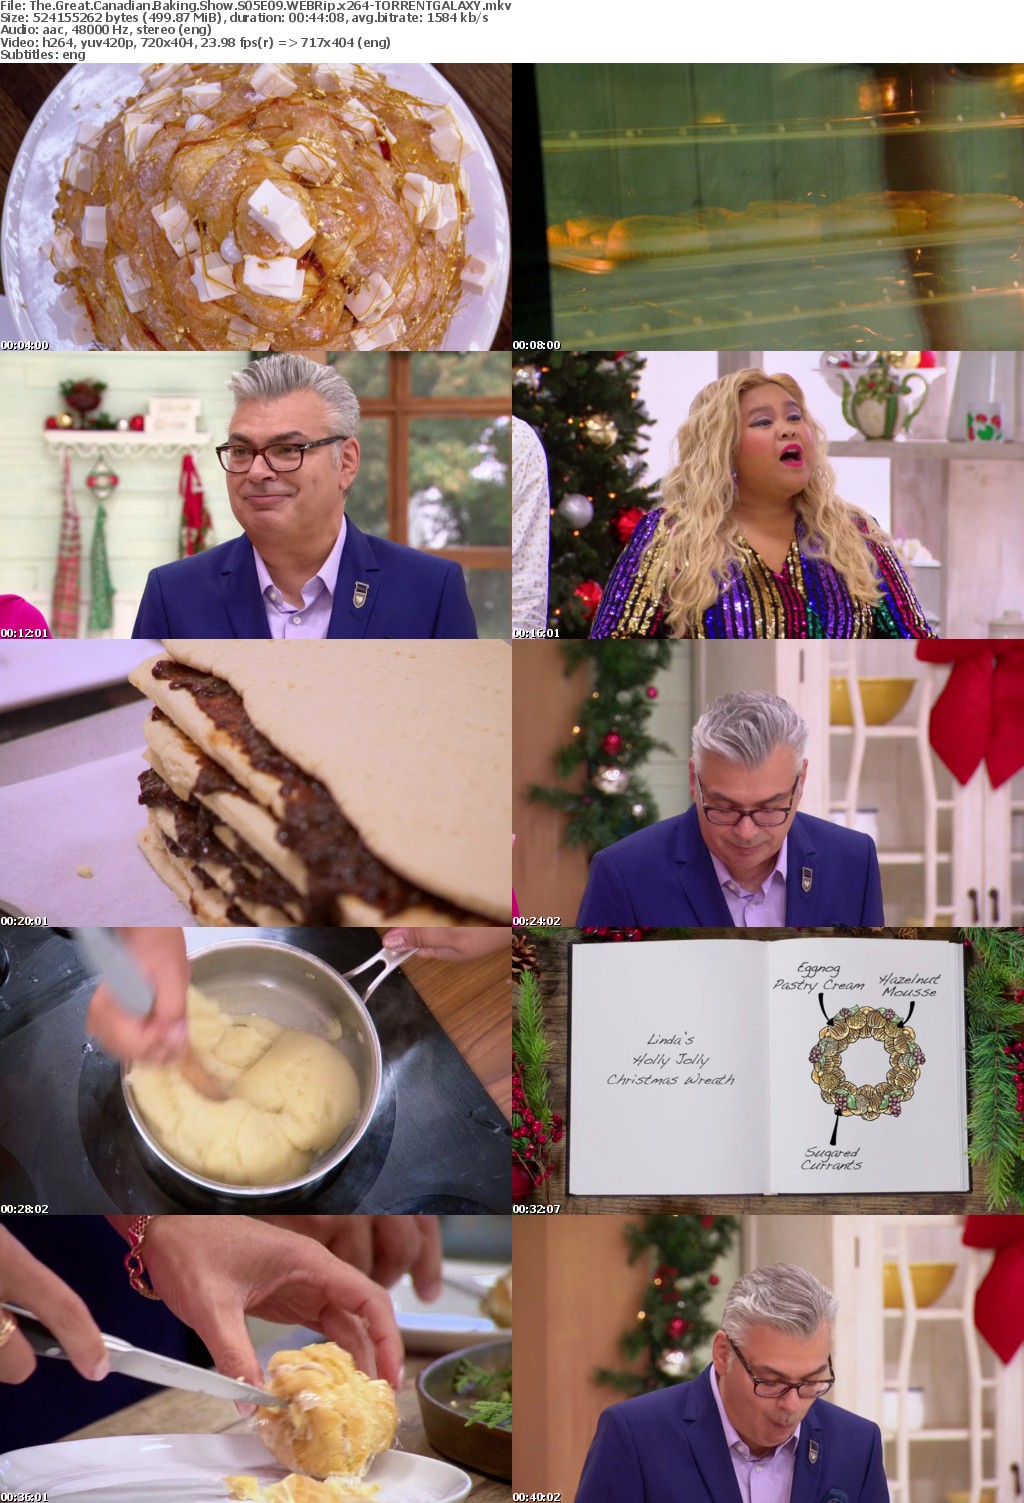 The Great Canadian Baking Show S05E09 WEBRip x264-GALAXY